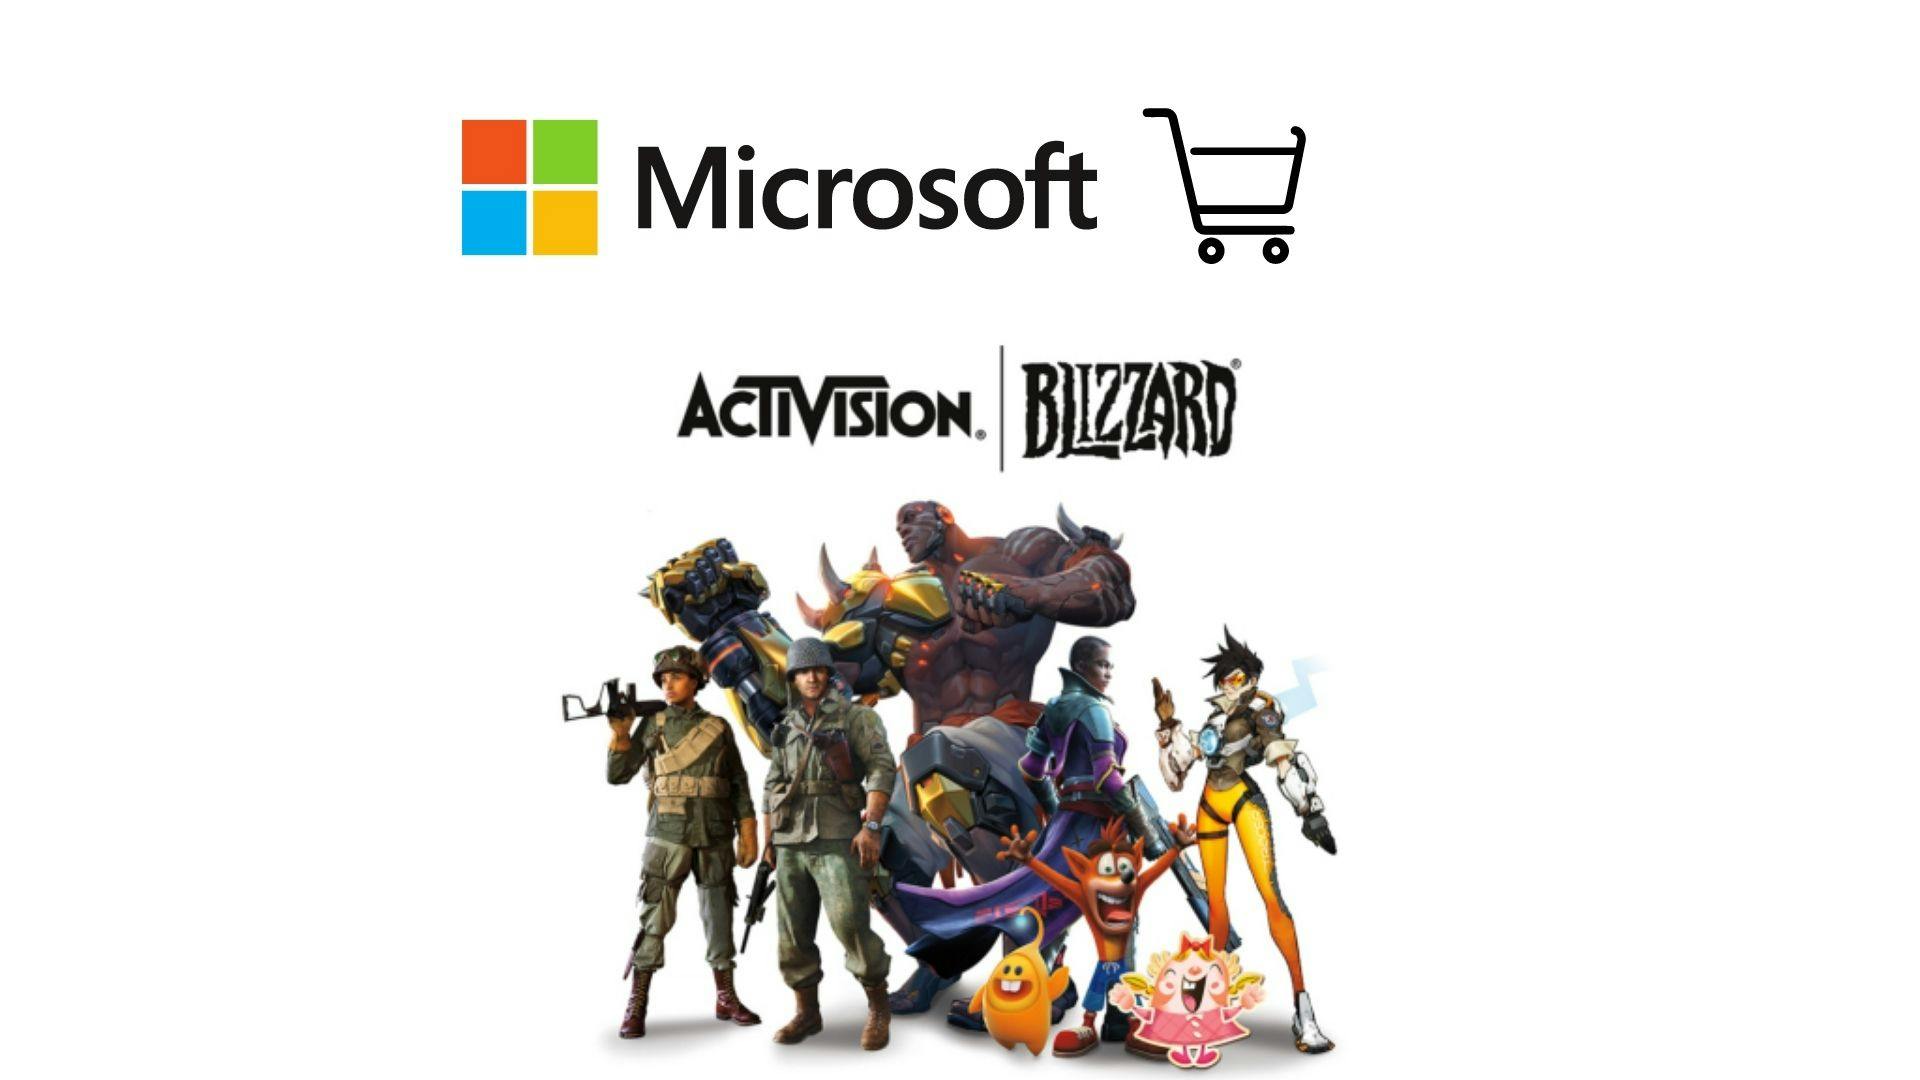 Biggest acquisition in the gaming industry, Microsoft to buy Activision Blizzard for $68.7 billion